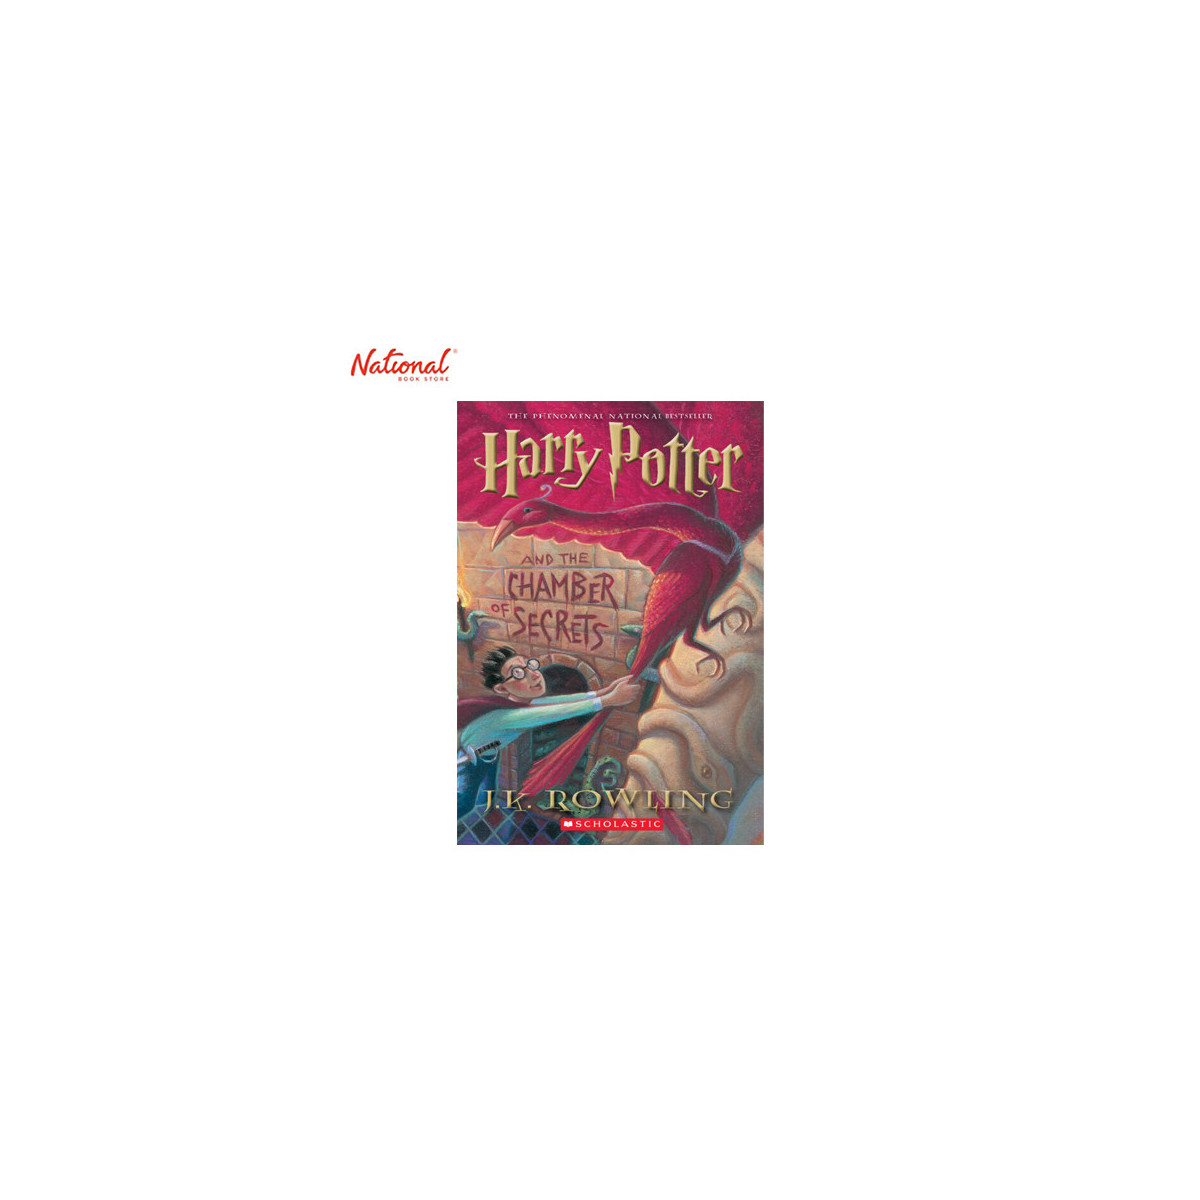 Harry Potter and the Chamber of Secrets Trade Paperback by J. K. Rowling